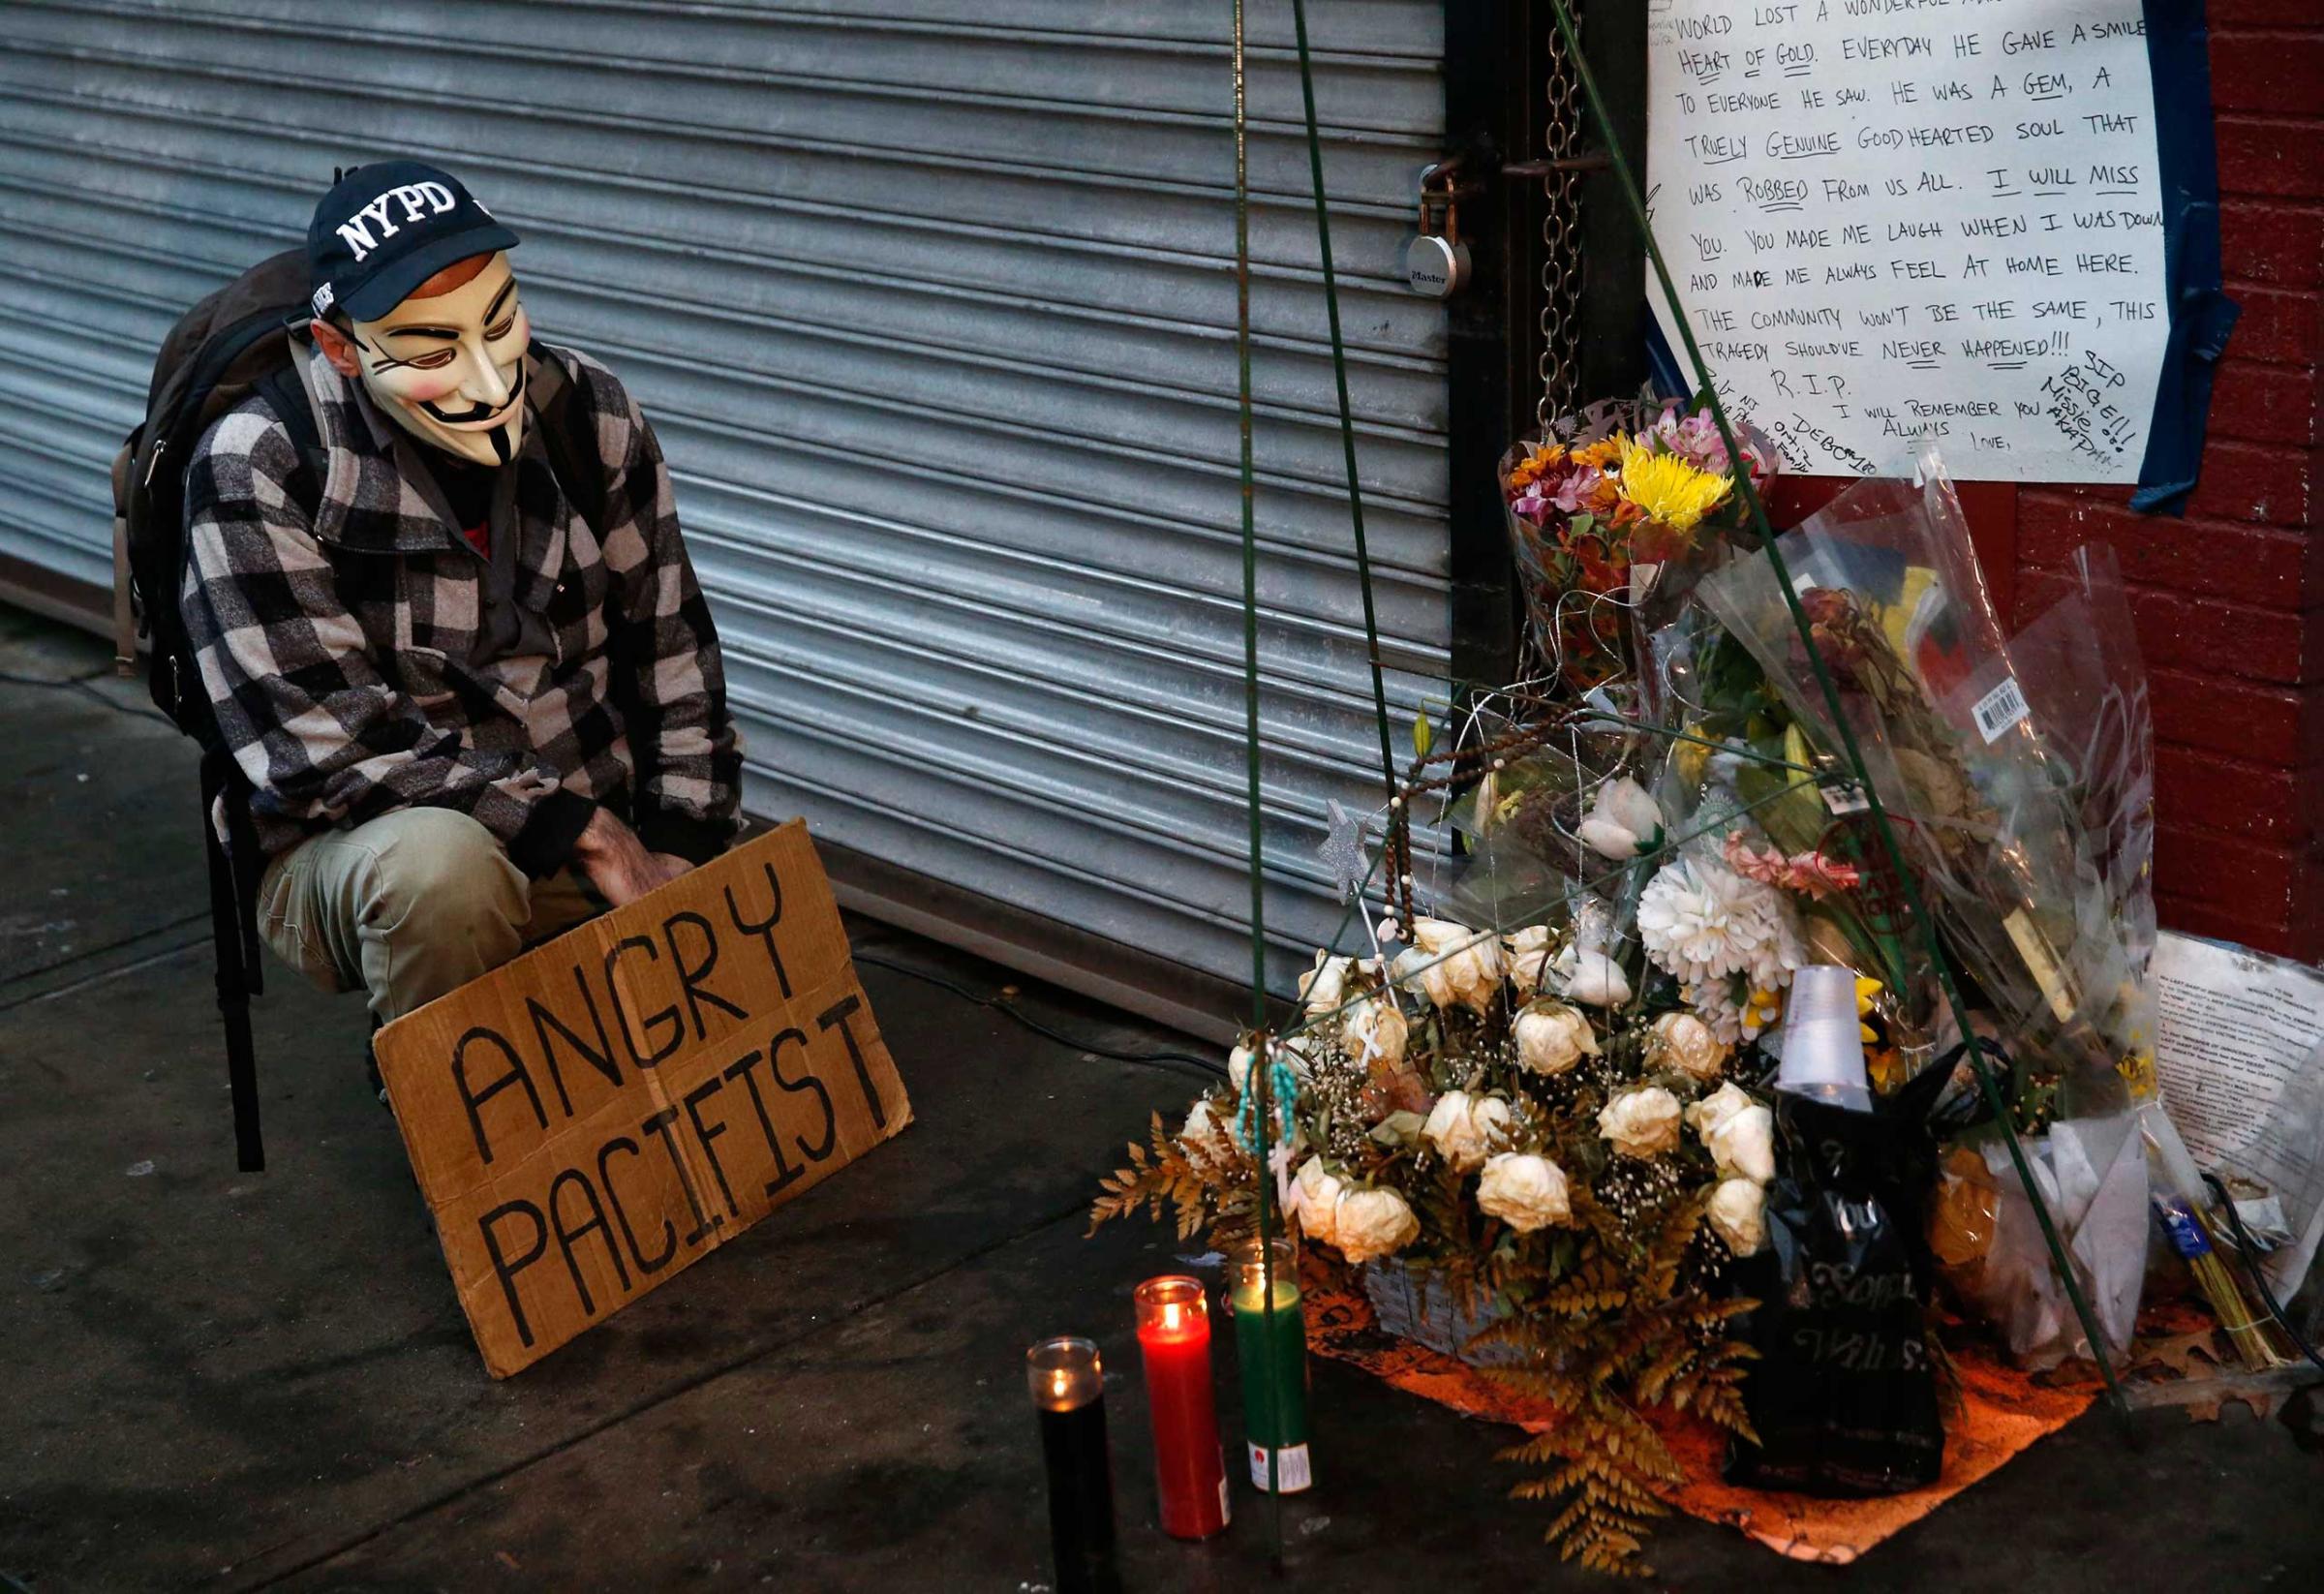 A demonstrator stands next to makeshift memorial where Eric Garner died during arrest in July in Staten Island borough of New York